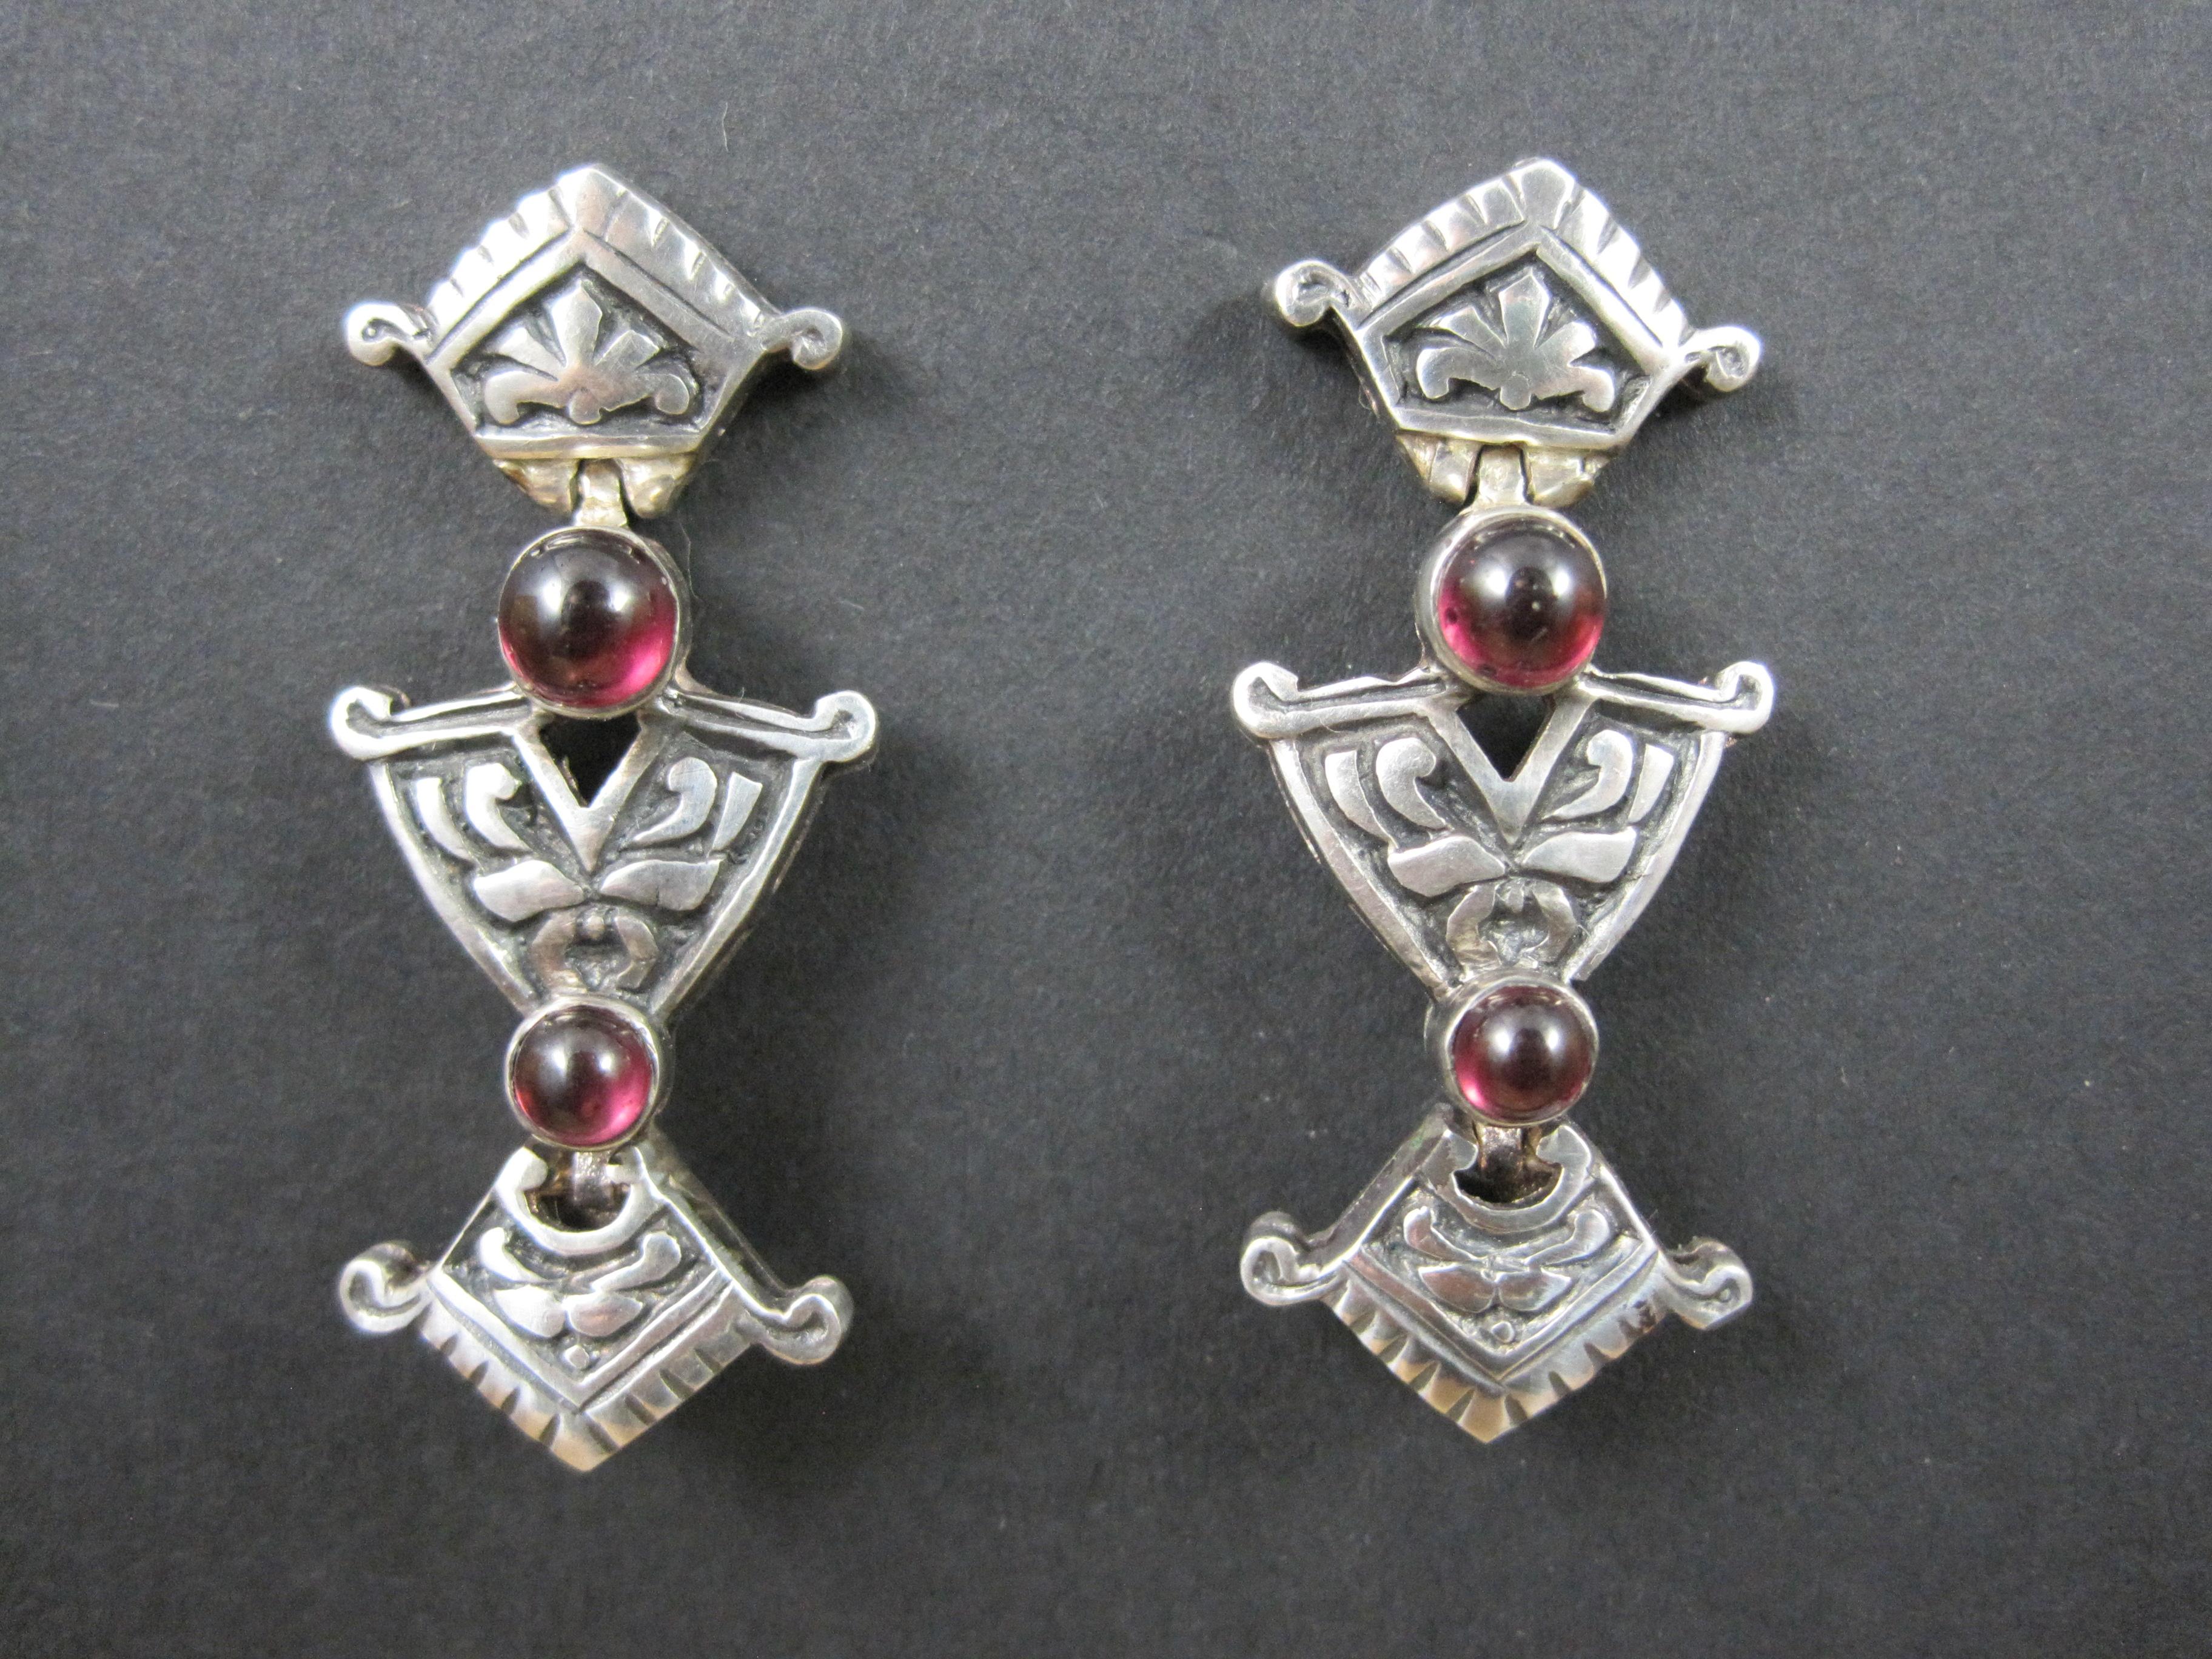 These gorgeous vintage earrings are sterling silver.
They have an art nouveau style to them with natural garnet cabochons.

Measurements: 5/8 by 1 1/2 inches
Weight: 9.9 grams

Condition: Excellent with minor patina

These earrings have been steam